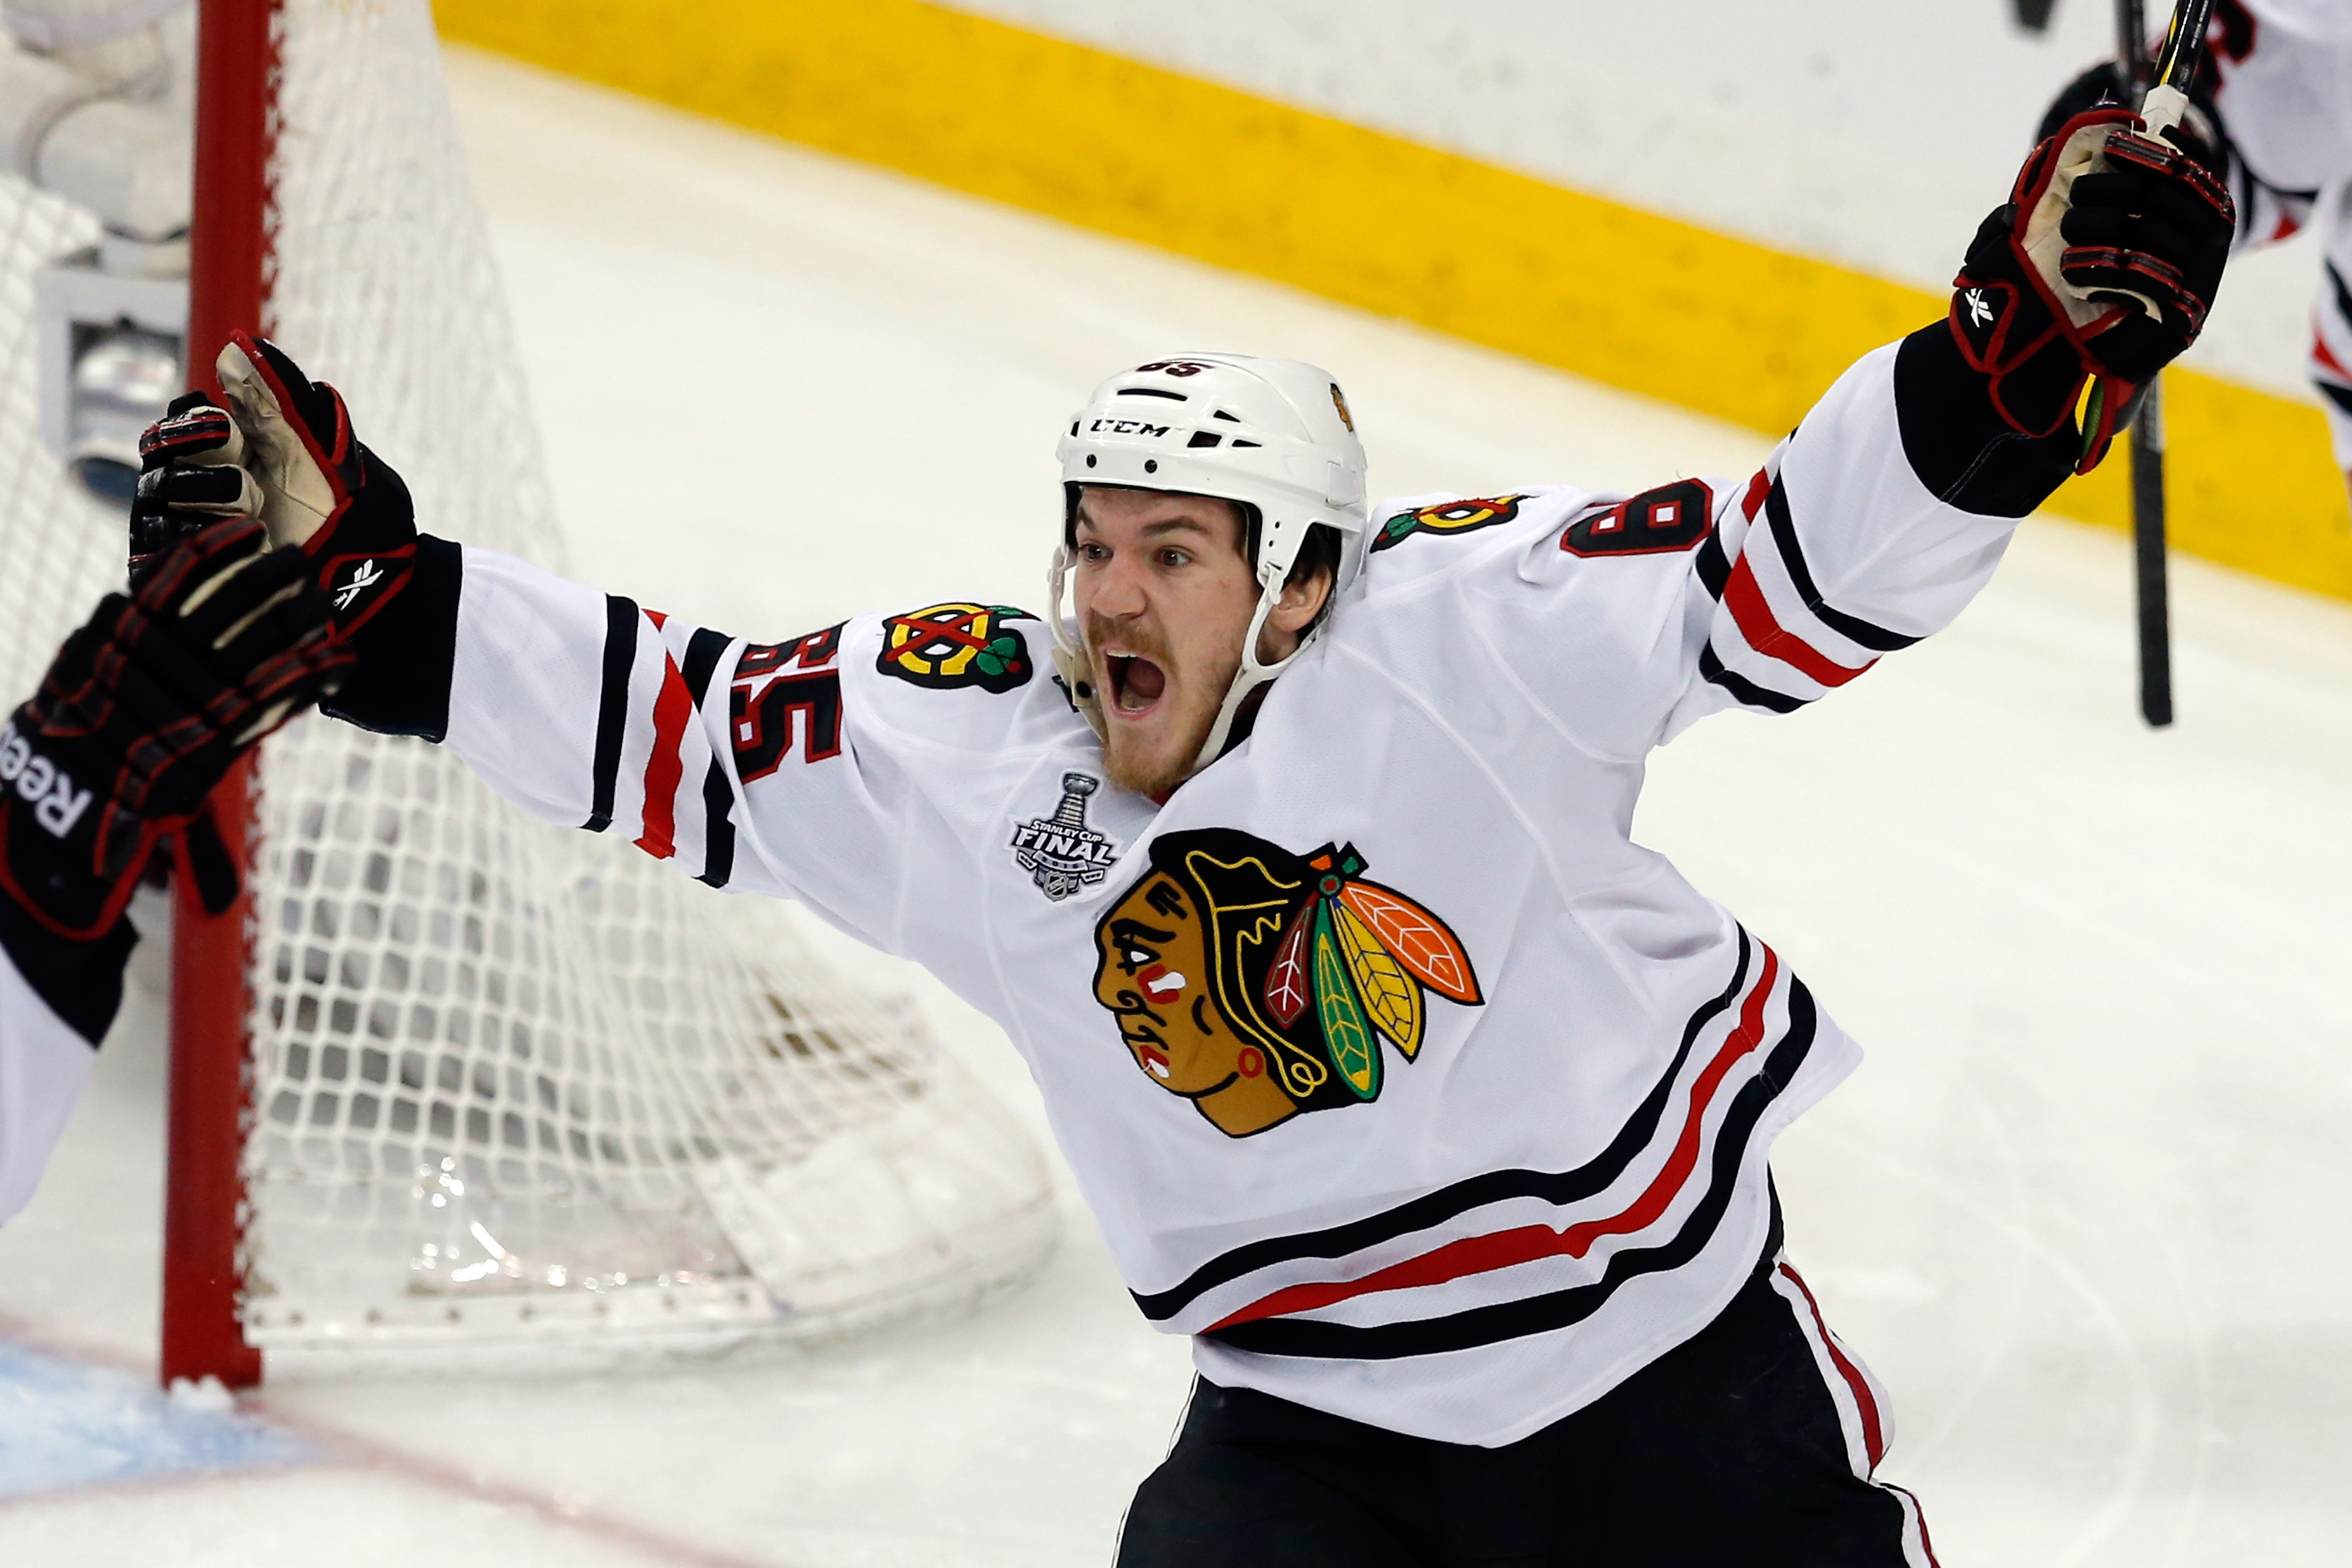 A Chicago Blackhawks player. (Photo by Mike Carlson/Getty Images)